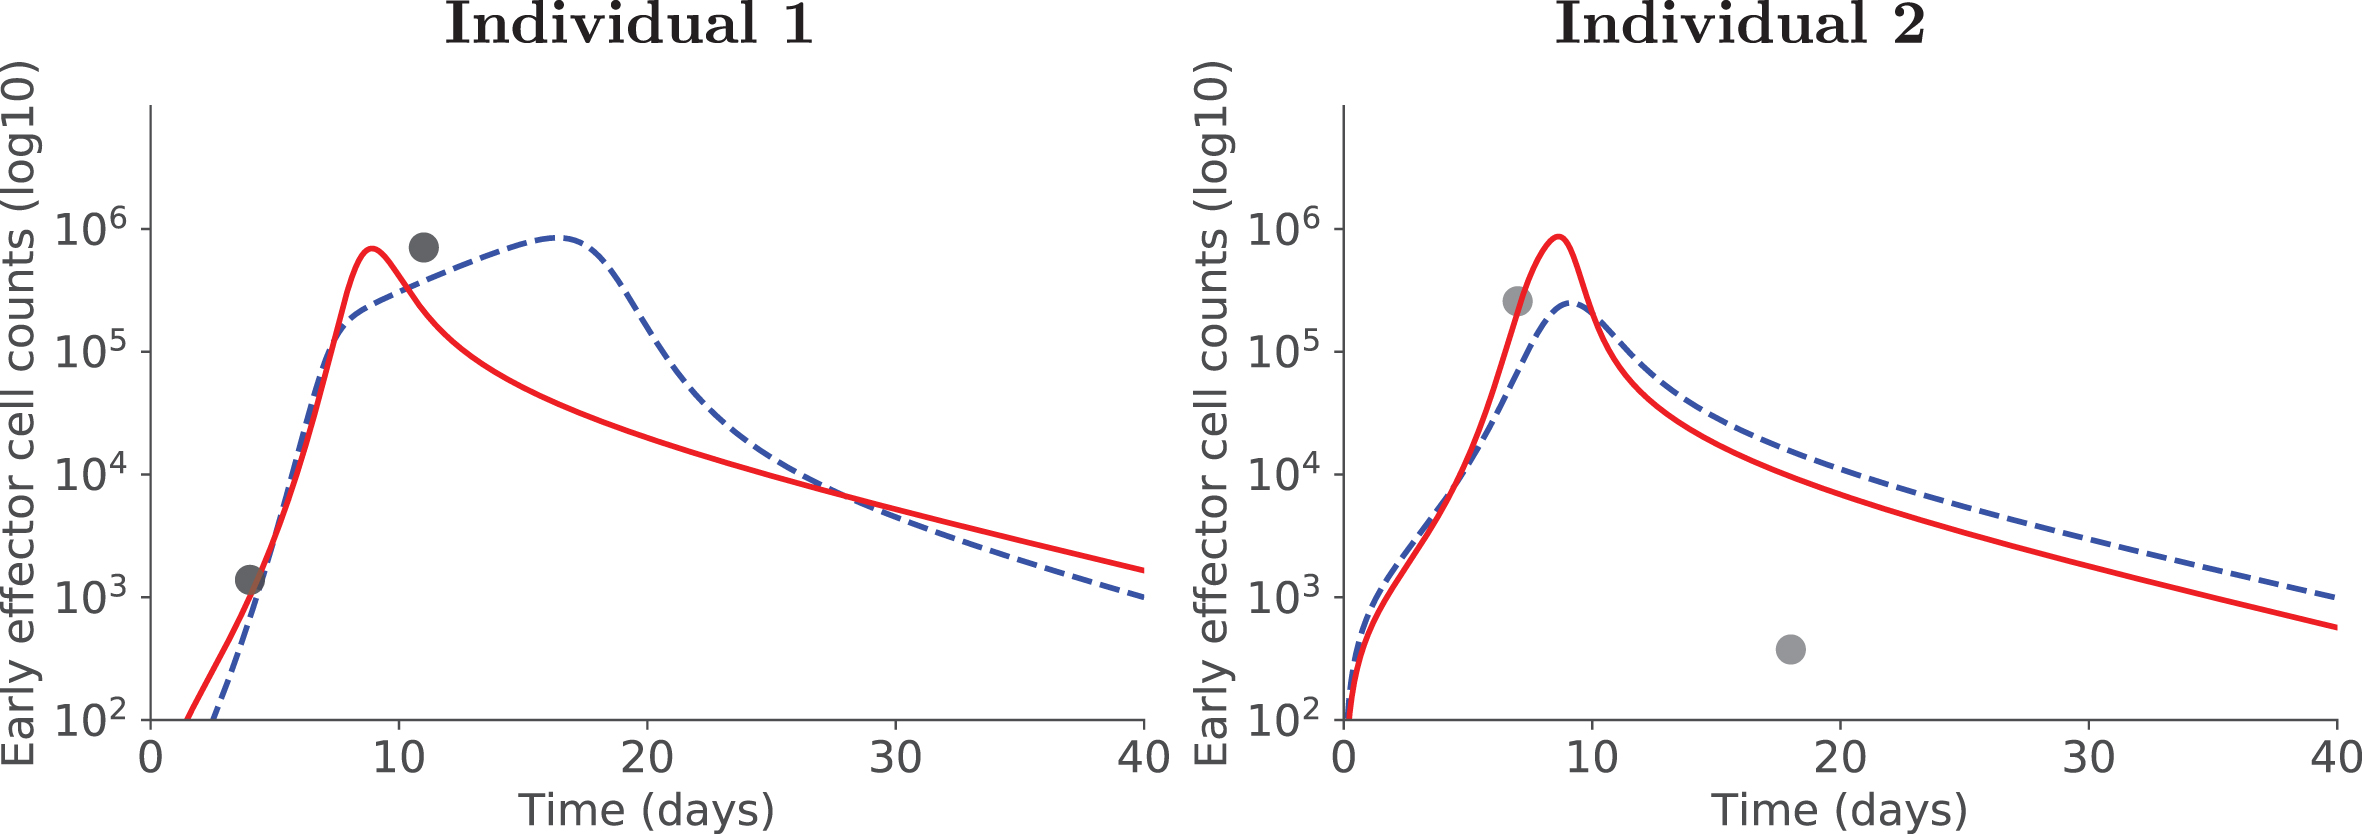 Positive side-effect of using covariates. For two illustrative individuals, accounting for covariates allows to better estimate early effector cell dynamics: red plain curve with covariate, blue dashed curve without covariate.